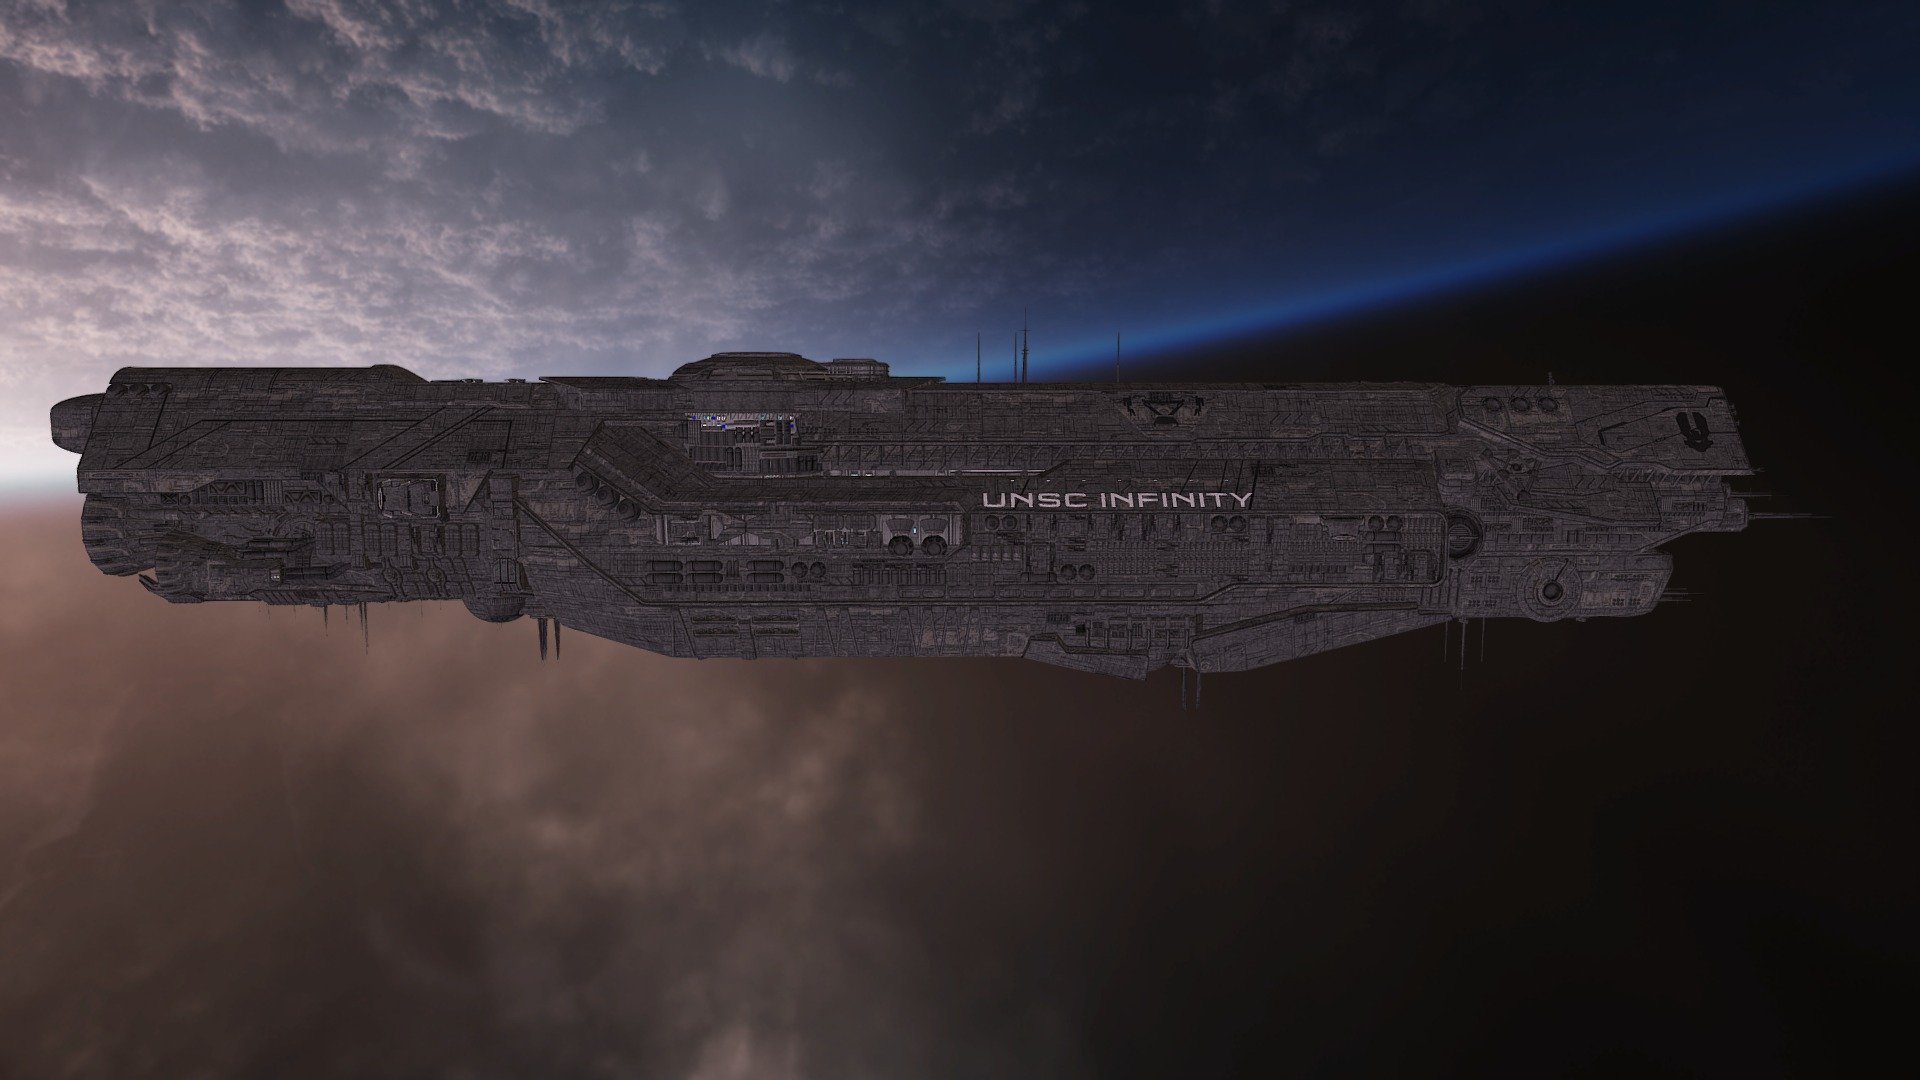 The Infinity wasn't originally conceived as a warship. The original purpose of the ship was to be a mobile colony ship in case of societal collapse during the days of the Human-Covenant war, as part of Project OUROBOROS, but the end of the war found it unfinished, and was repurposed as a warship. In 2553 Engineers from Trevelyan began assisting in the construction of the vessel, allowing Forerunner shielding to be equipped. It was completed that year, with the vessel's first deployment being to Sanghelios, where it fought Jul'Mdagio and his bunch.

After the ship's completion, it was re-purposed as a peacetime vessel, searching for Forerunner installations. It was during this mission in 2557 that the ship took part in the First Battle of Requiem. The same vessel would return for the Second Battle of Requiem 3d model